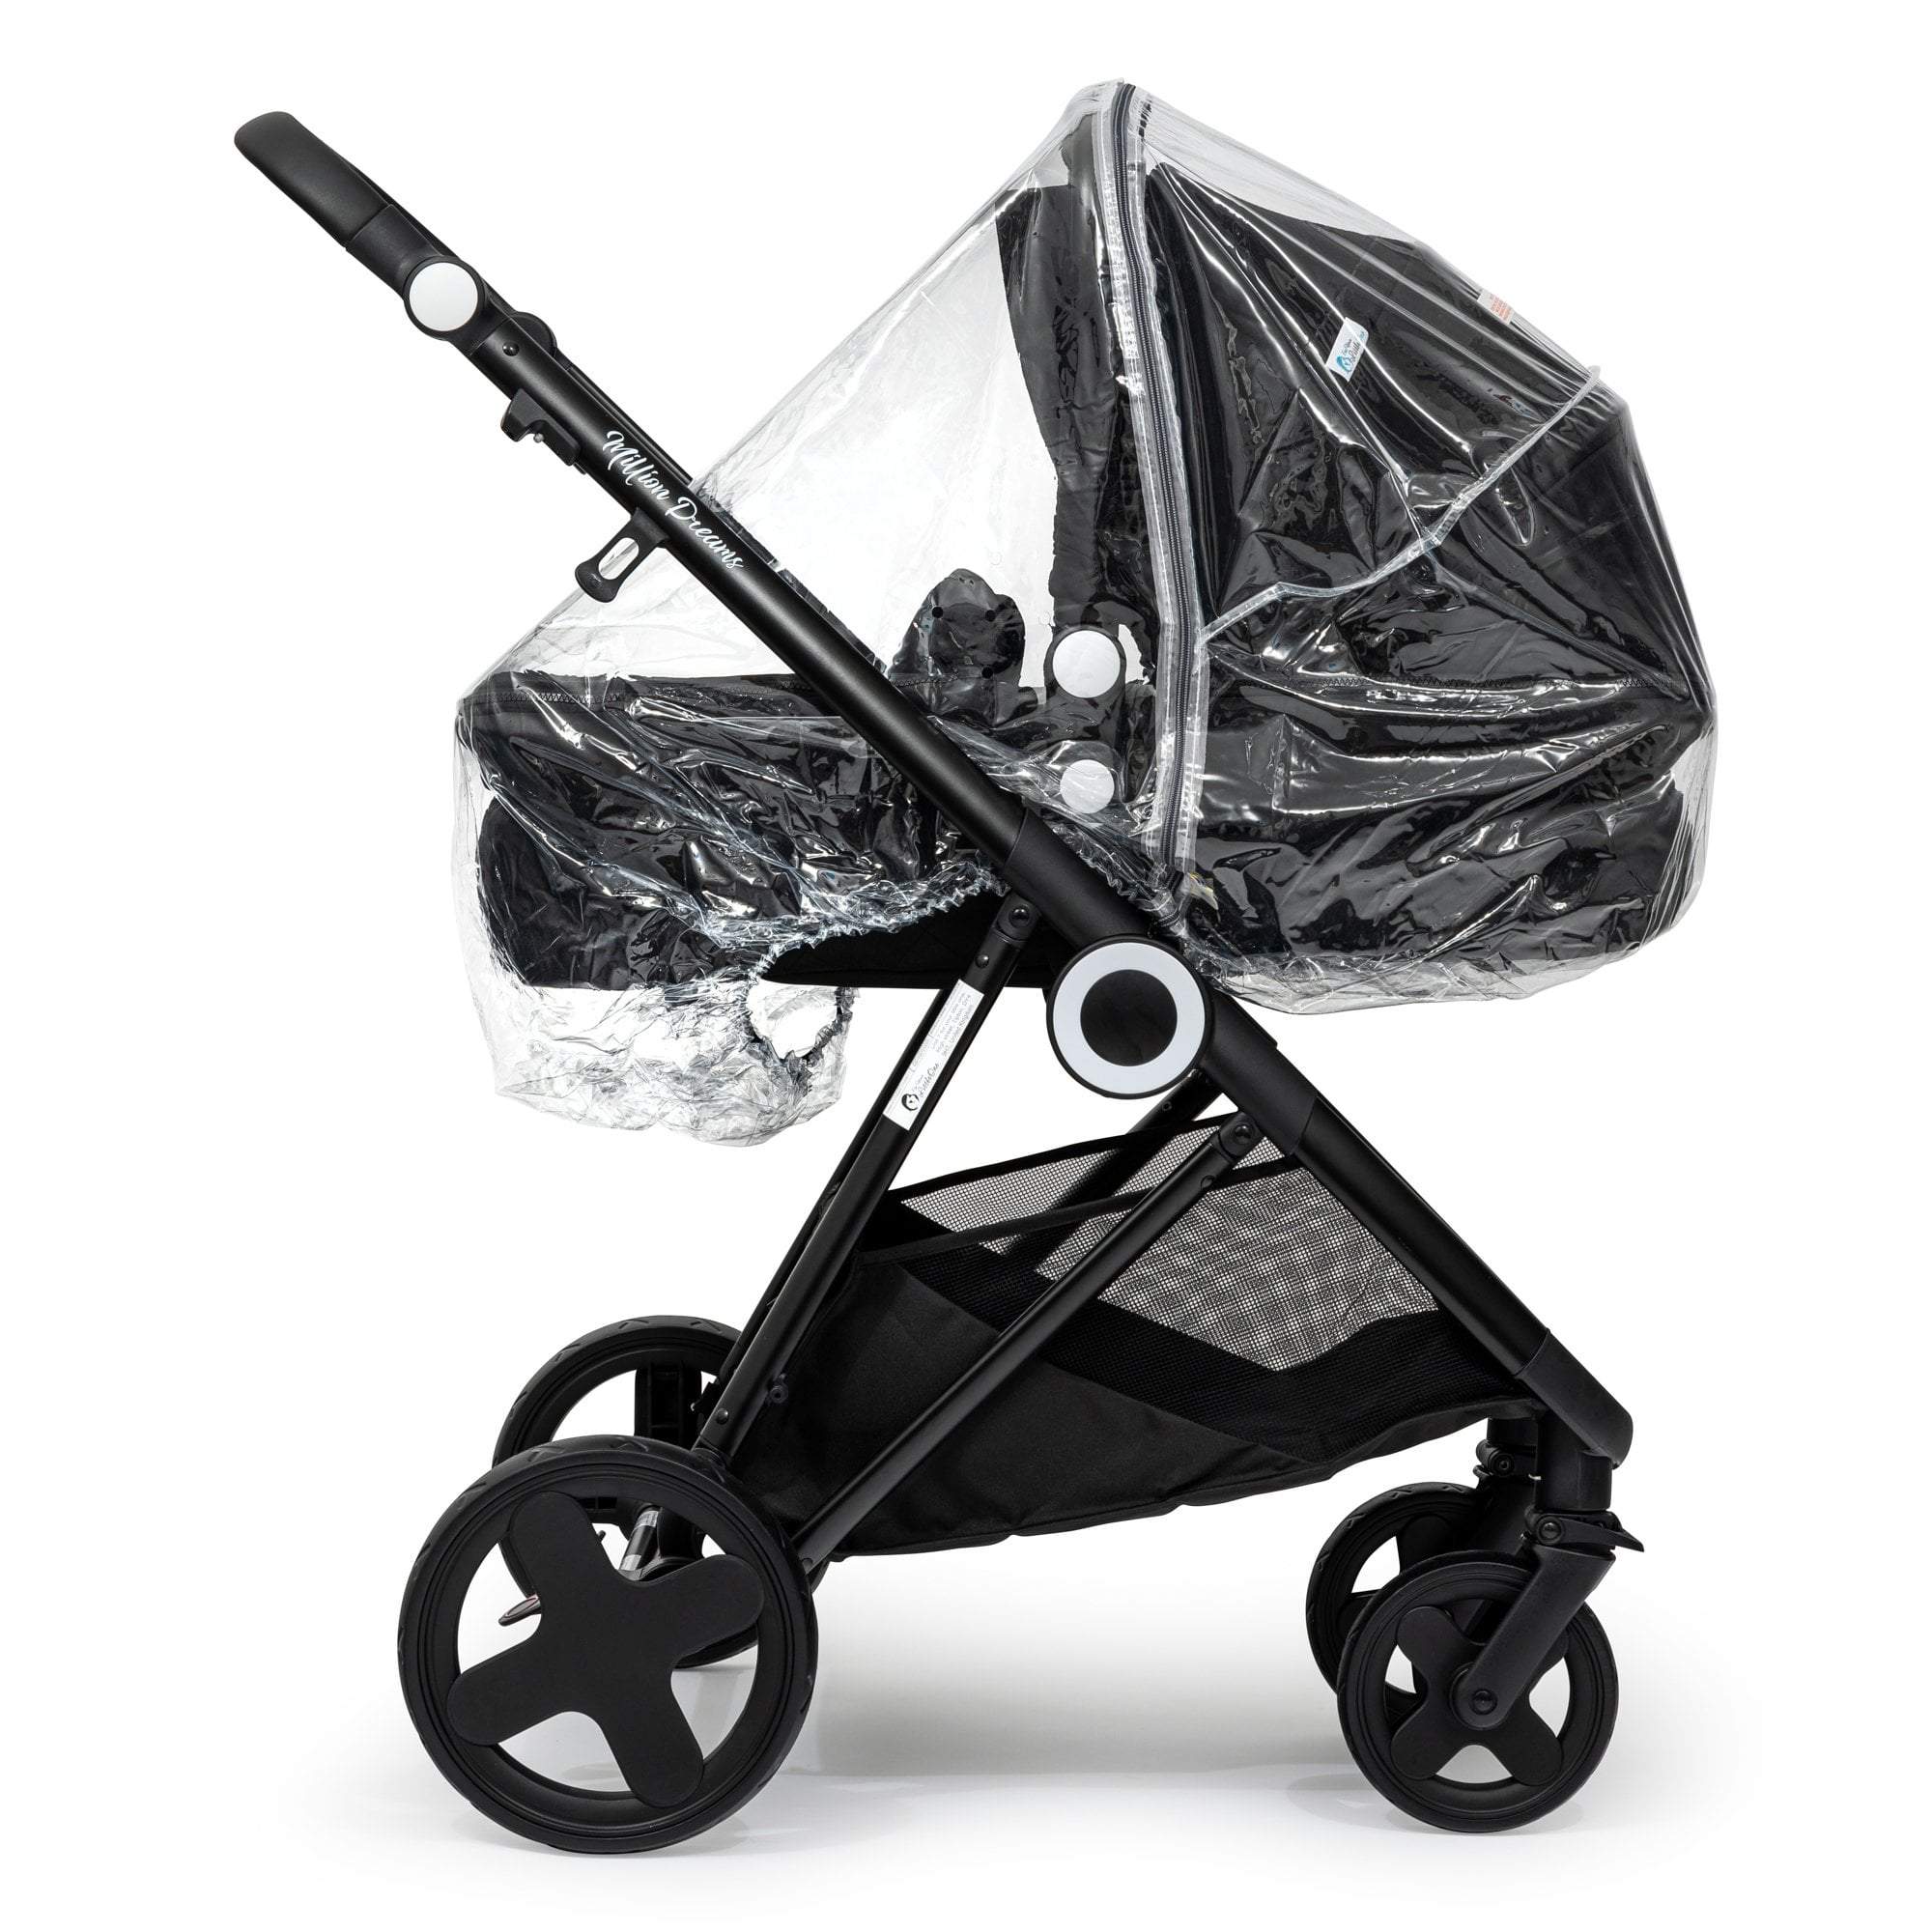 Carrycot Raincover Compatible With Combi - Fits All Models - For Your Little One